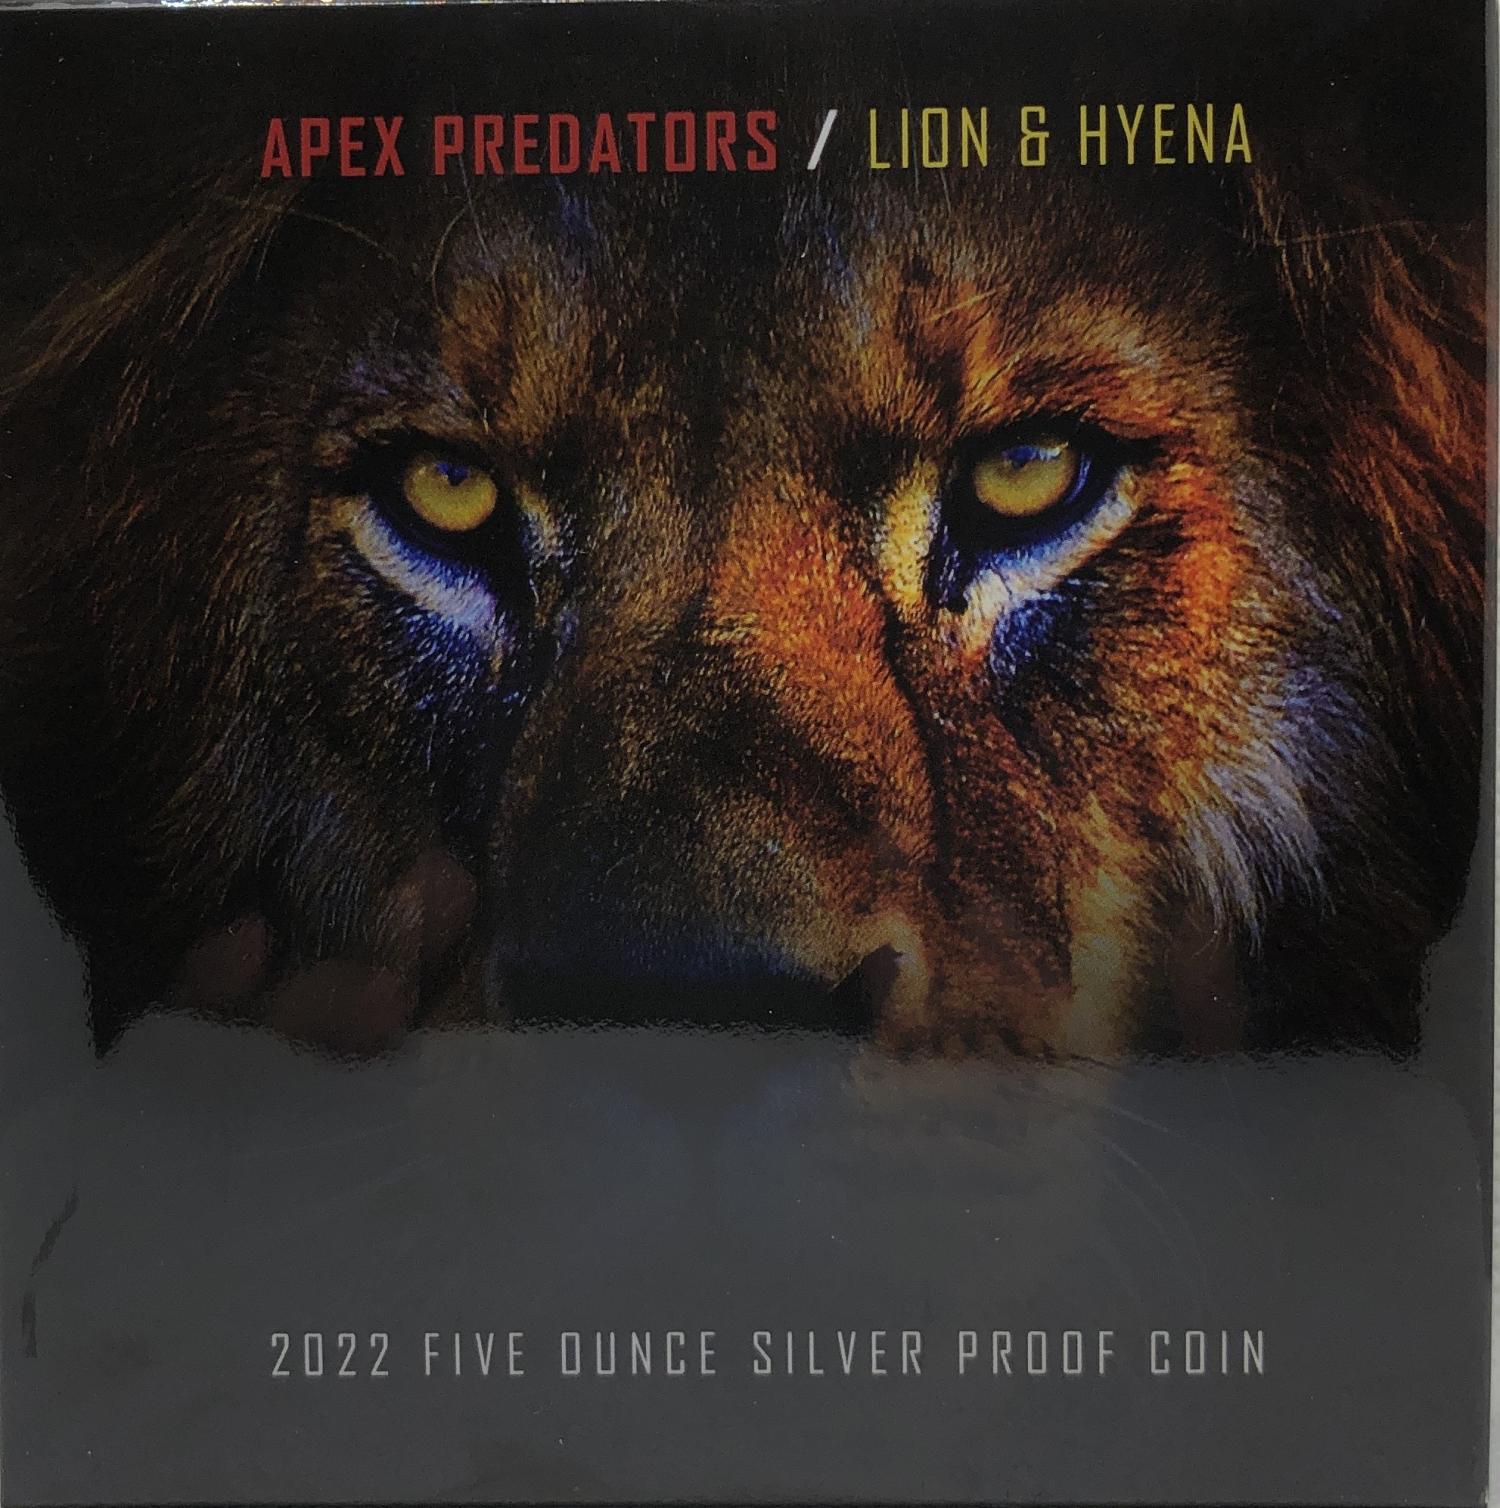 Thumbnail for 2022 Niue 5oz Gold Plated Silver Proof Apex Predators Lion and Hyena